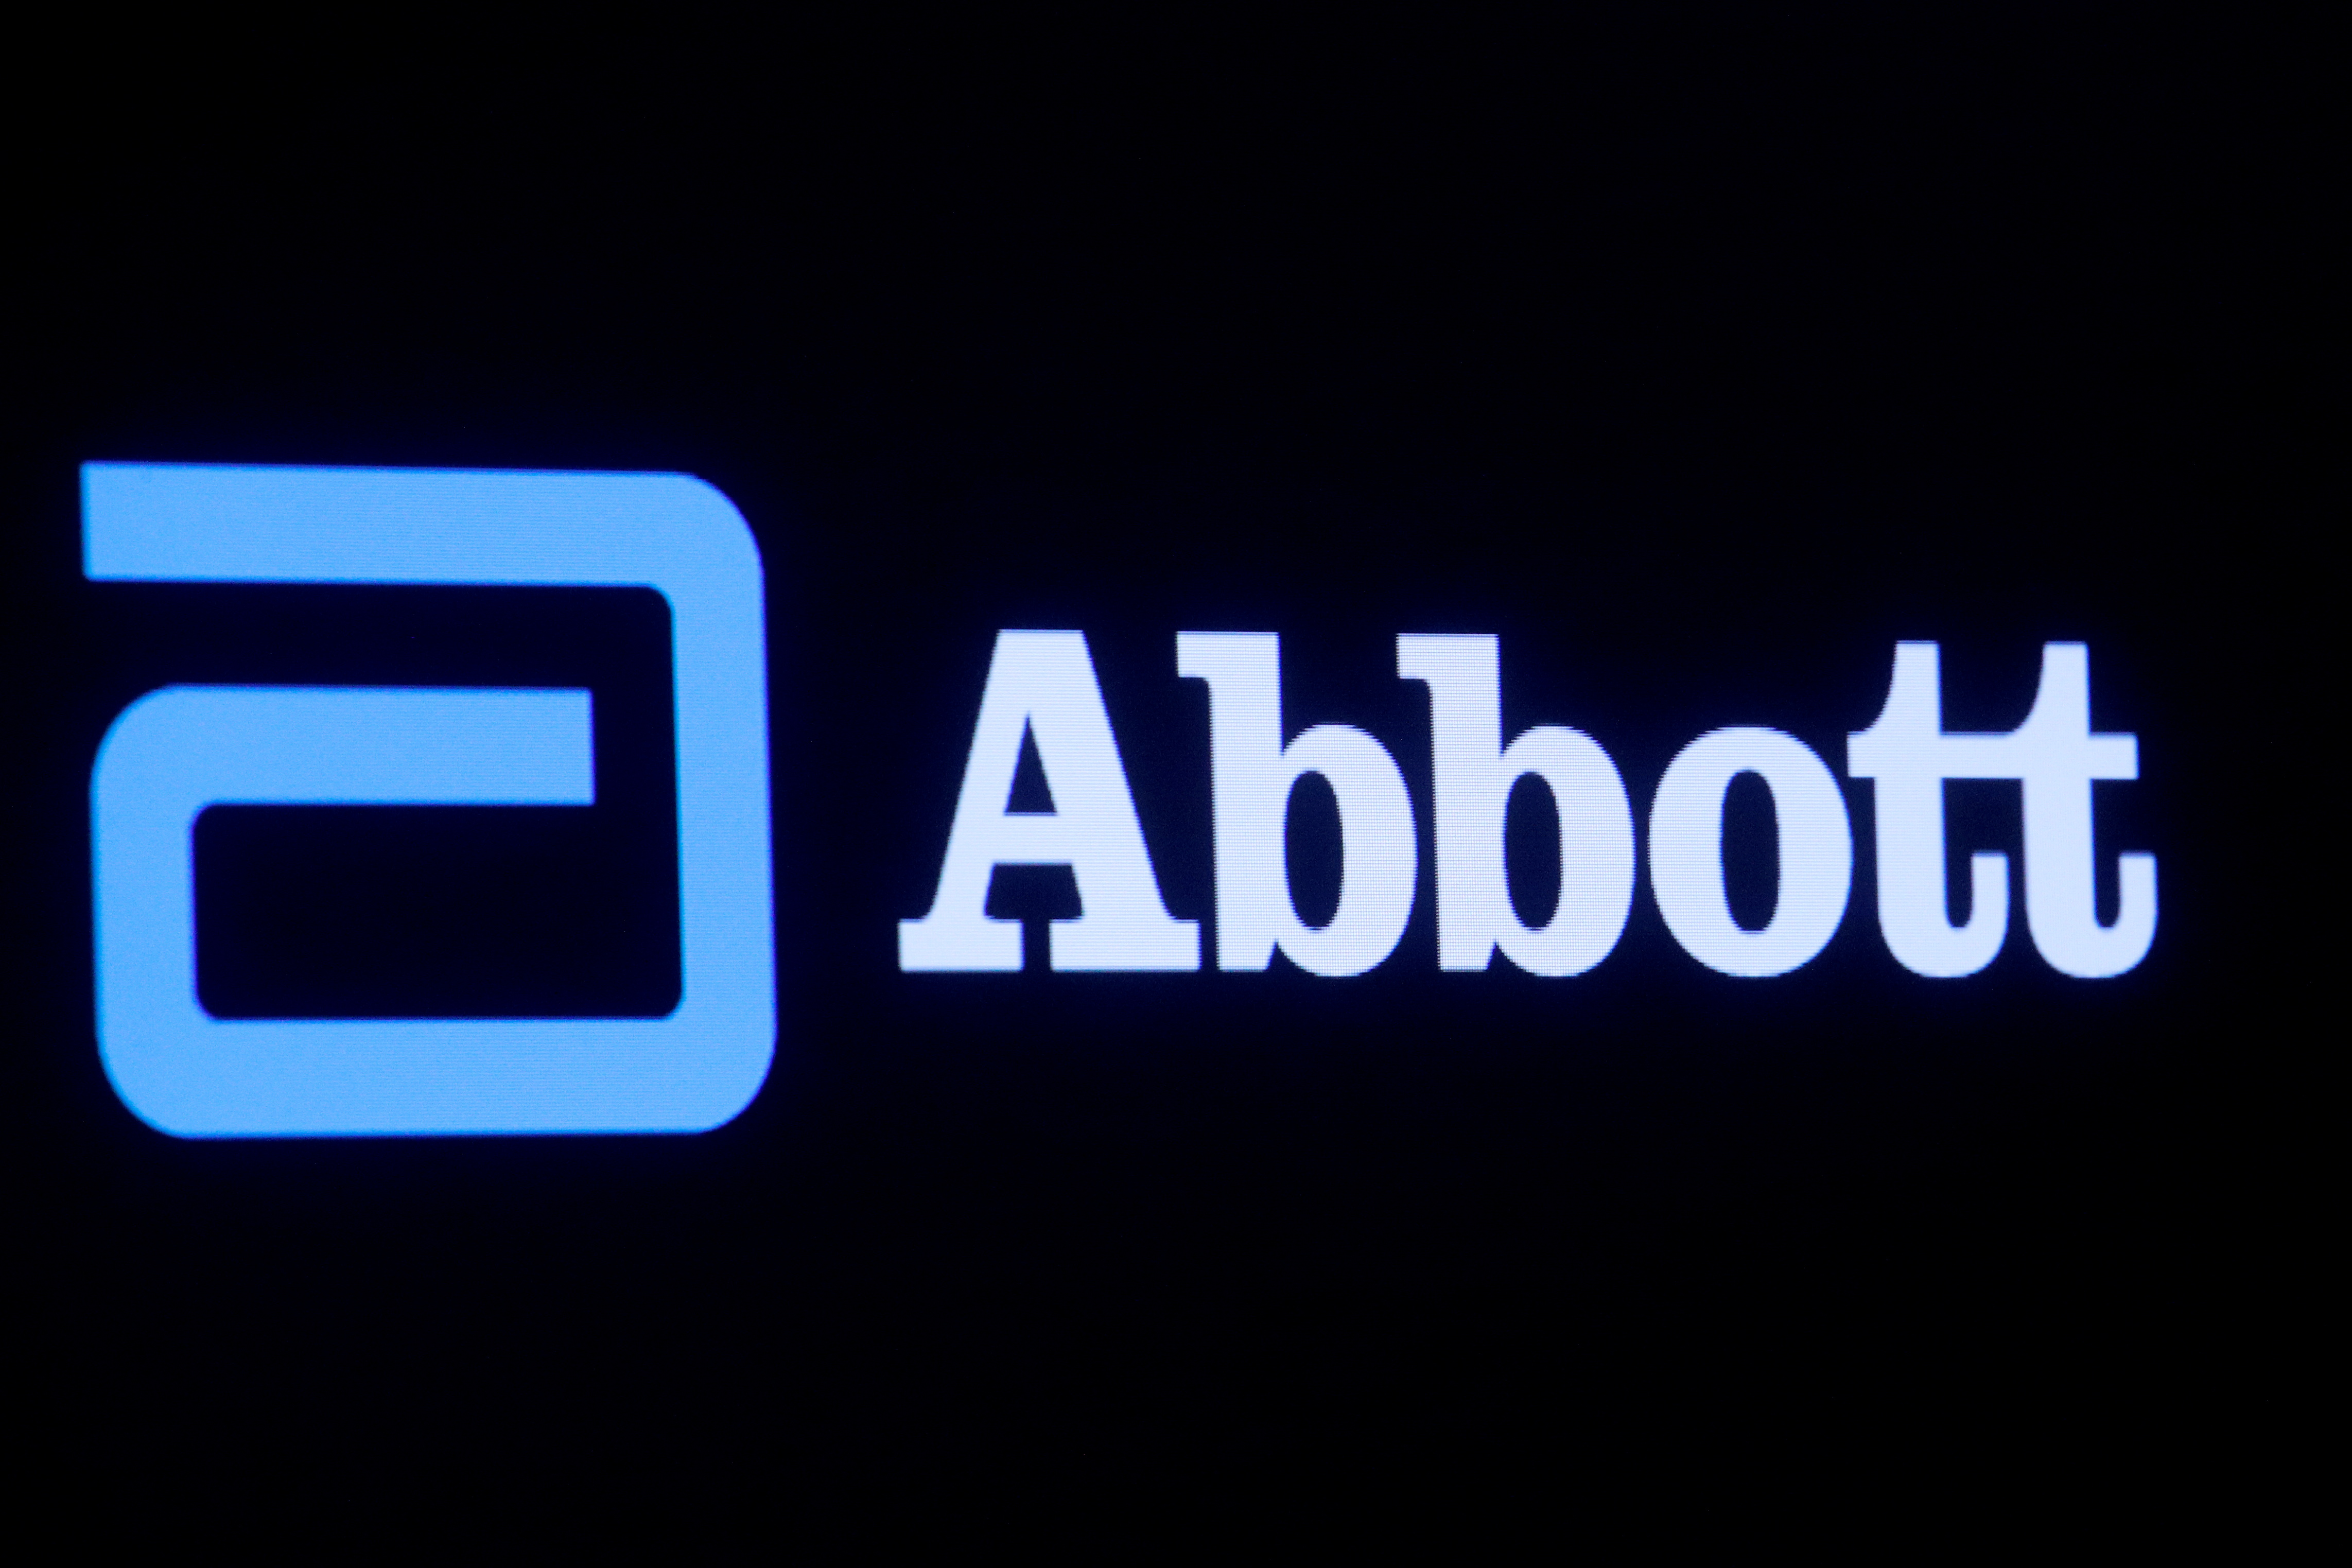 Abbott Laboratories logo is displayed on a screen at the New York Stock Exchange (NYSE) in New York City, U.S., October 18, 2021.  REUTERS/Brendan McDermid